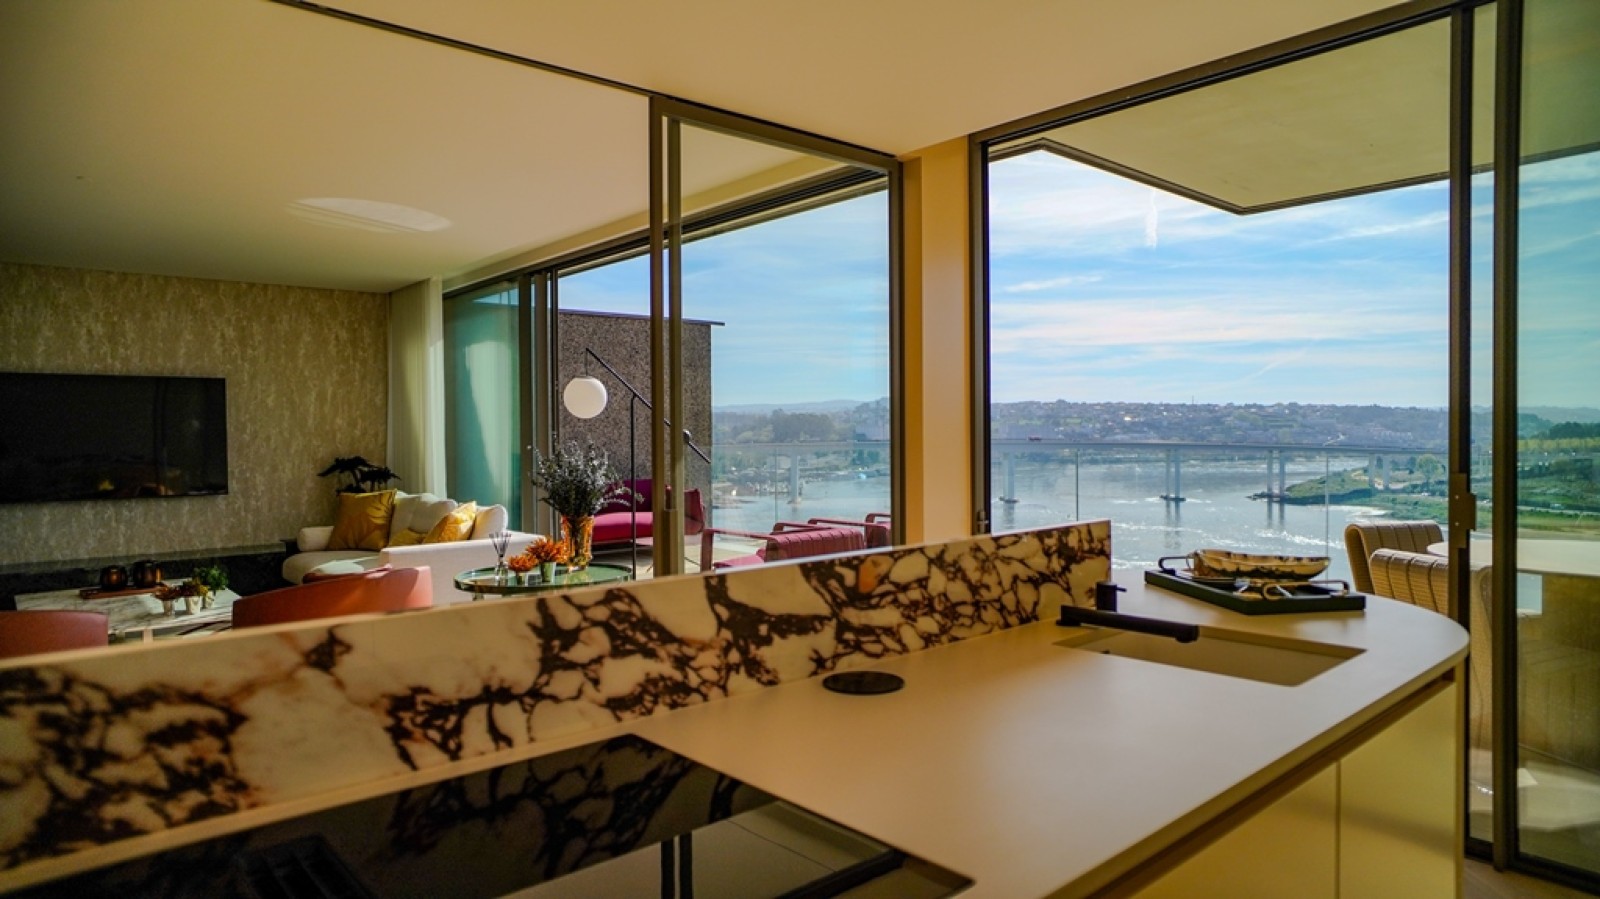 Four + one bedroom duplex apartment with river view, for sale, Porto, Portugal_260169